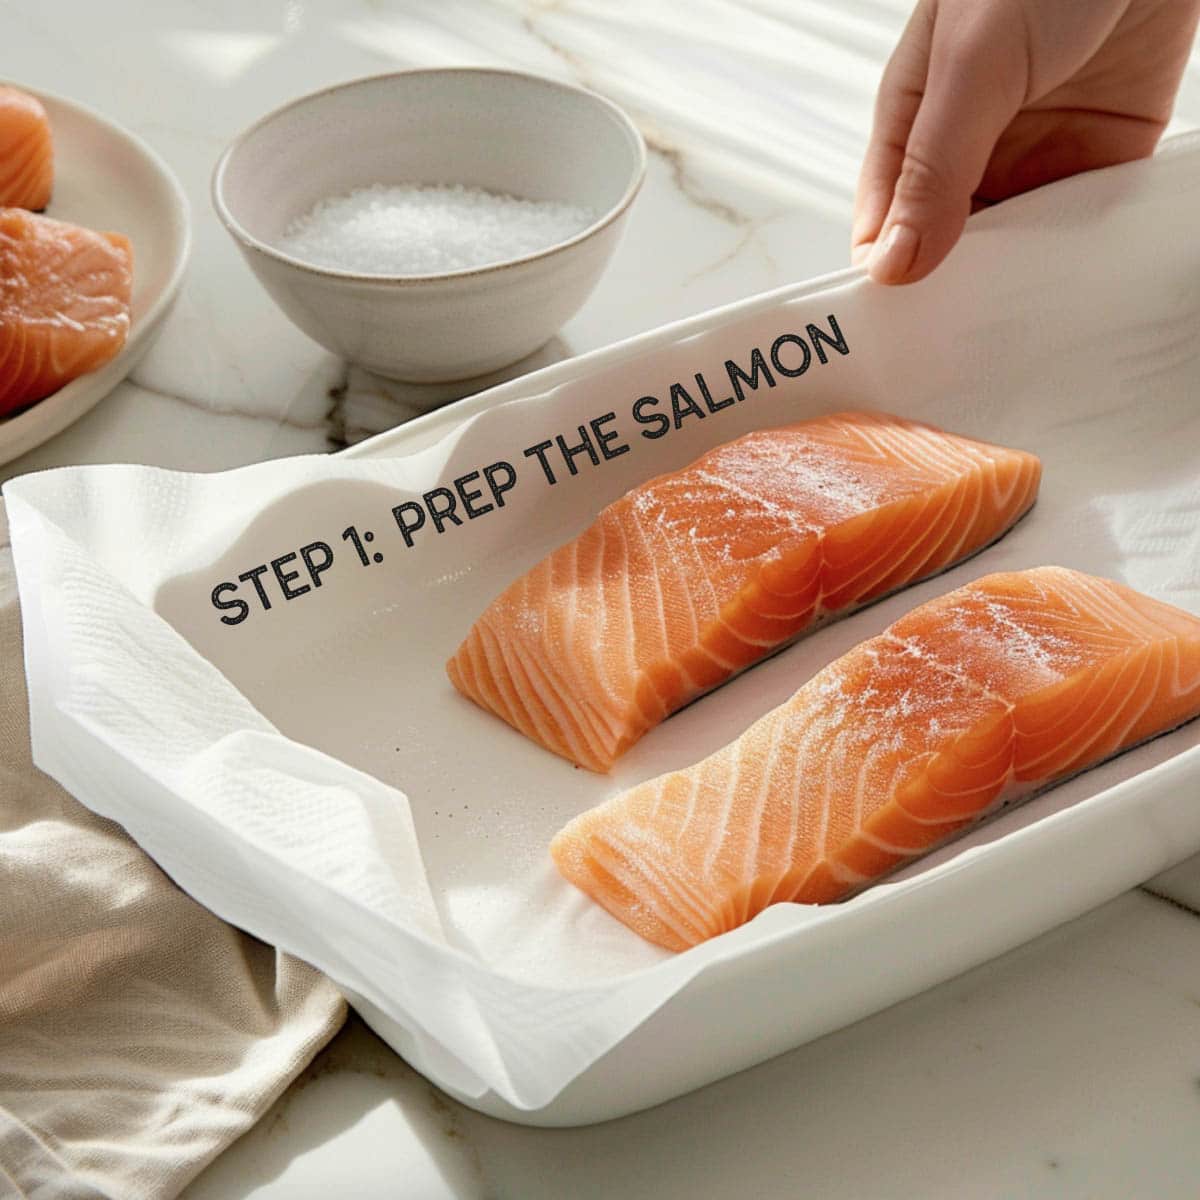 patting dry the salmon fillets with paper towels